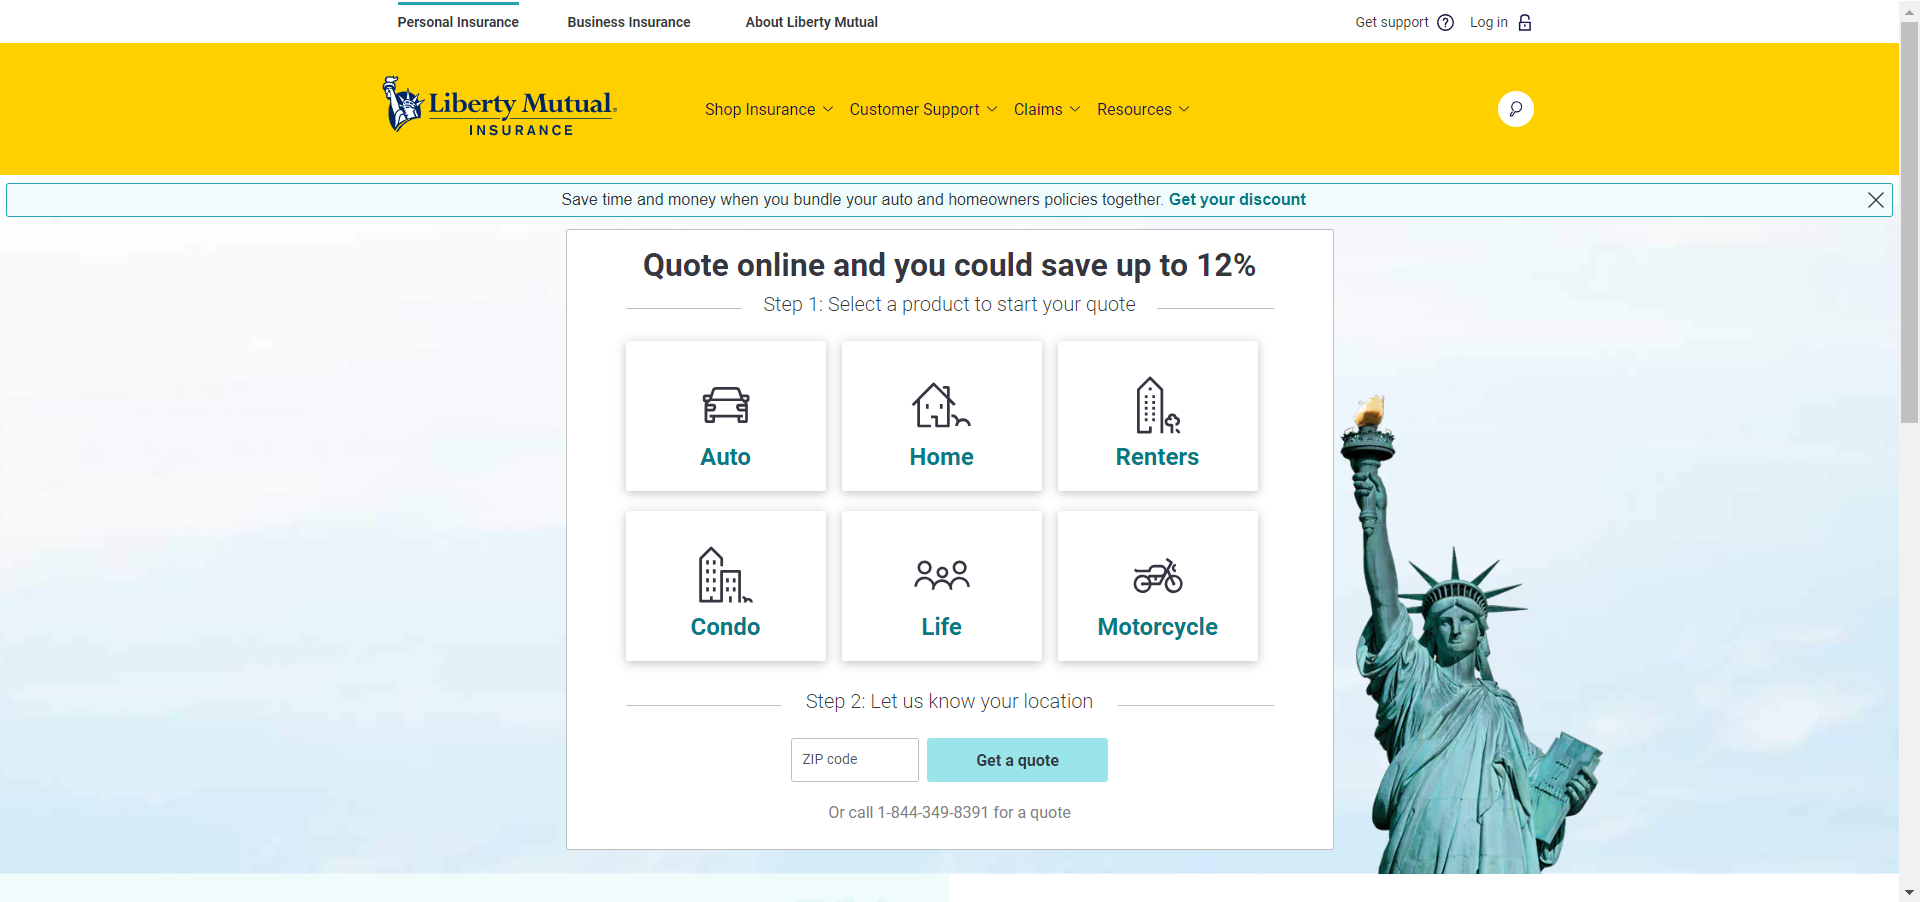 Liberty Mutual Home Page Quote Directions 1